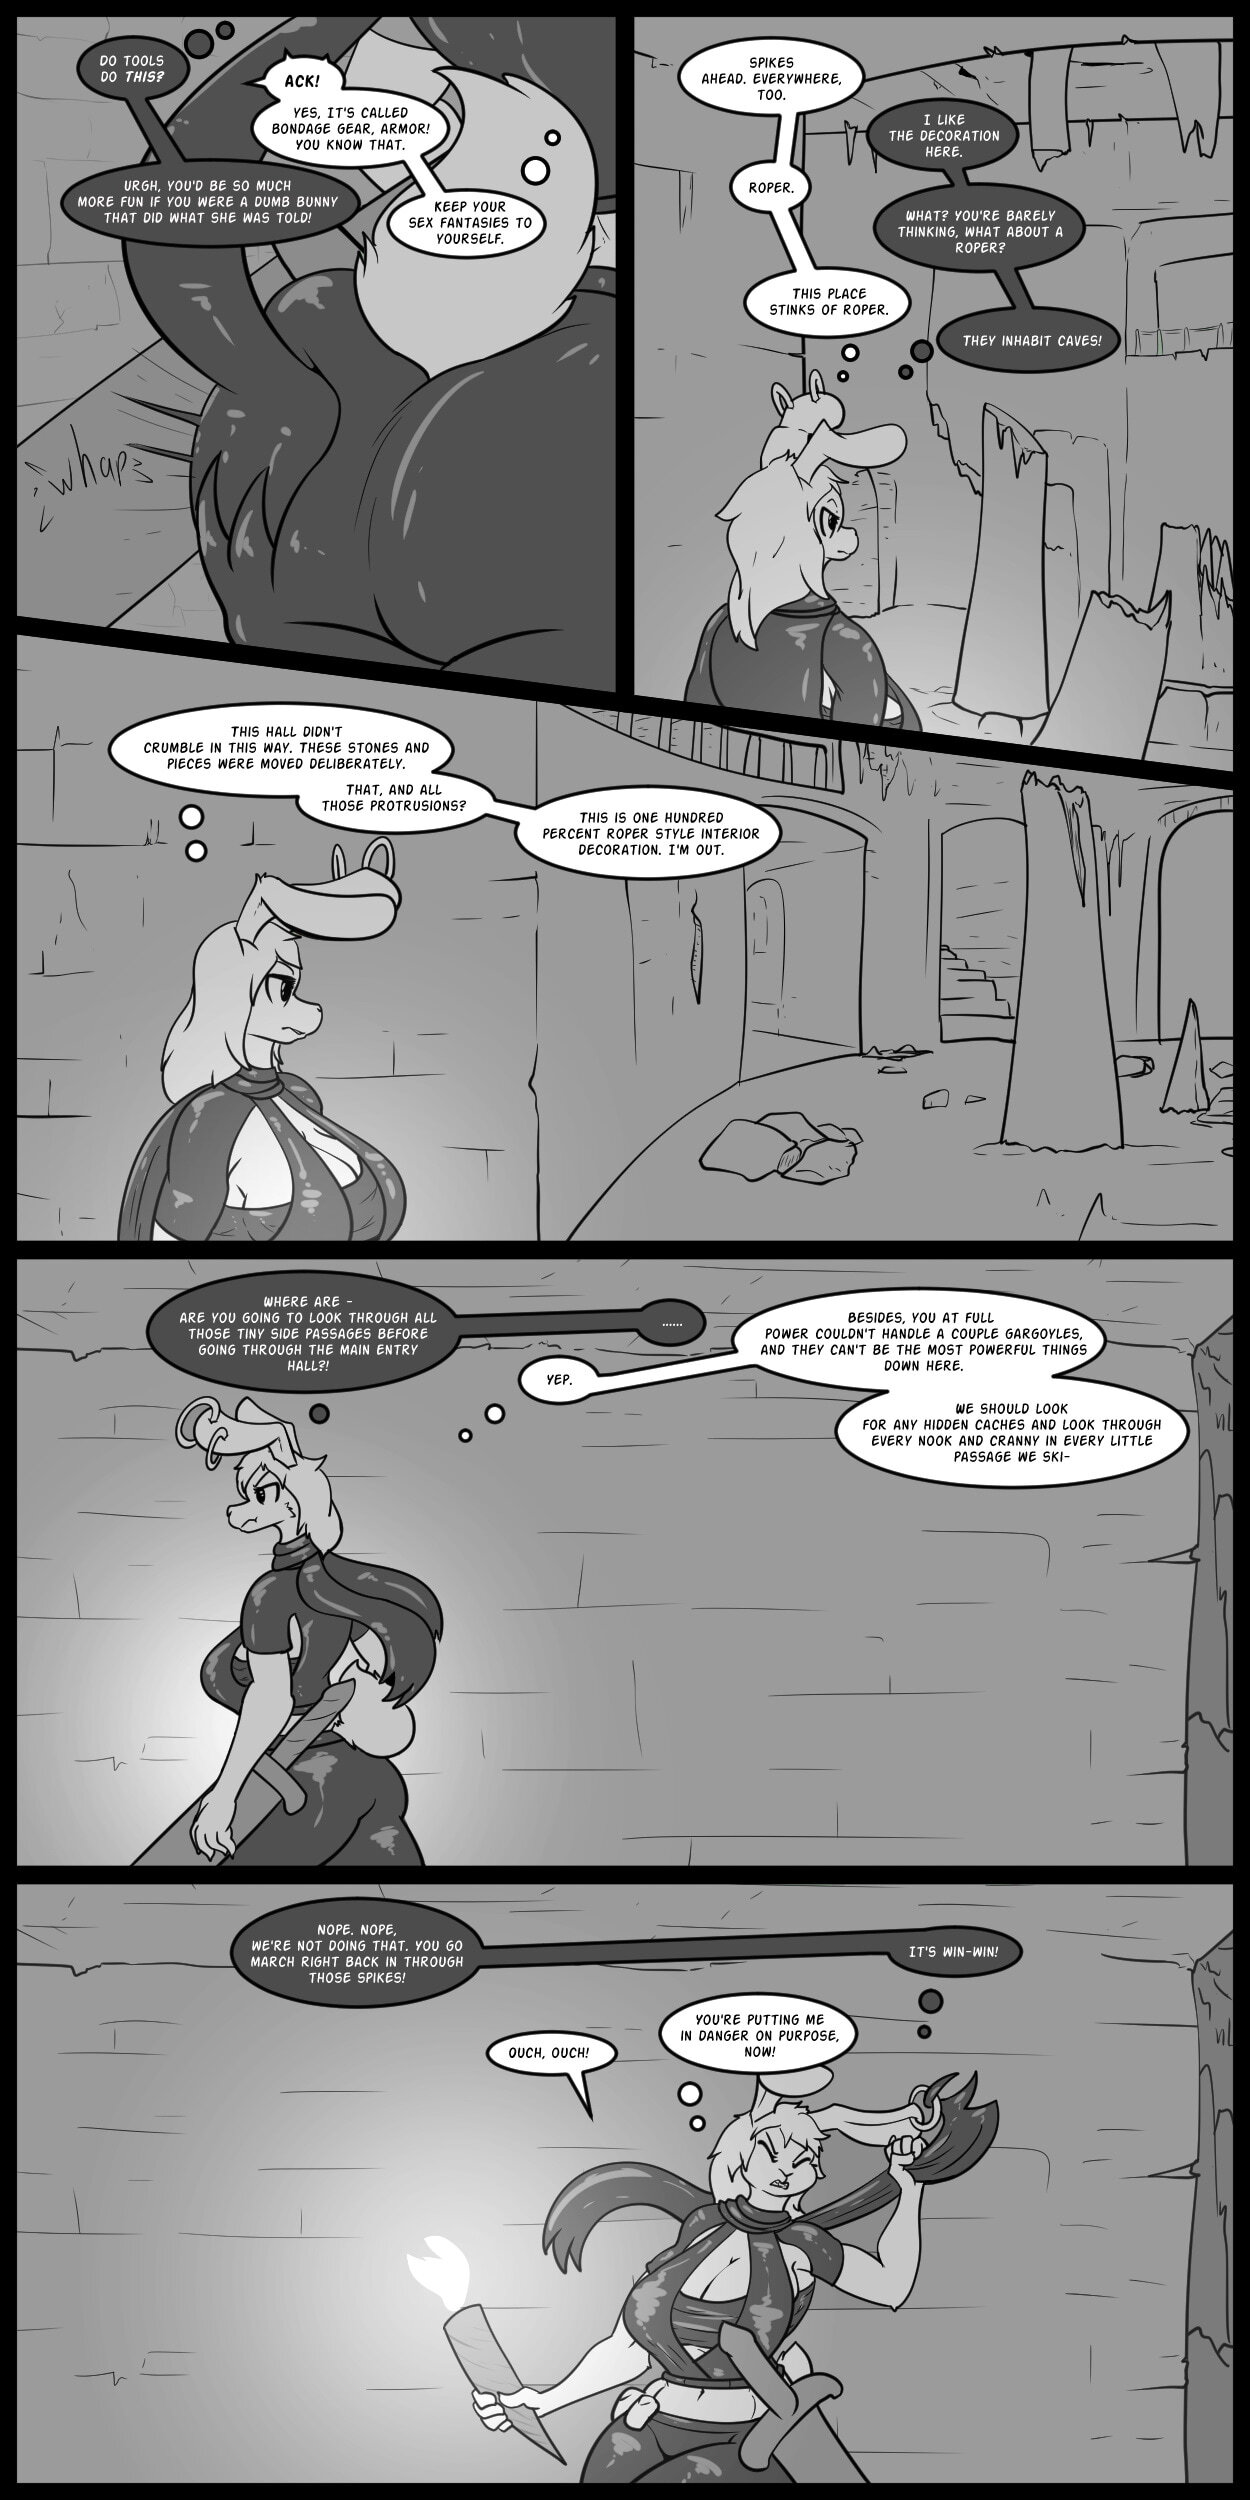 Rough Situation 2 - Page 3